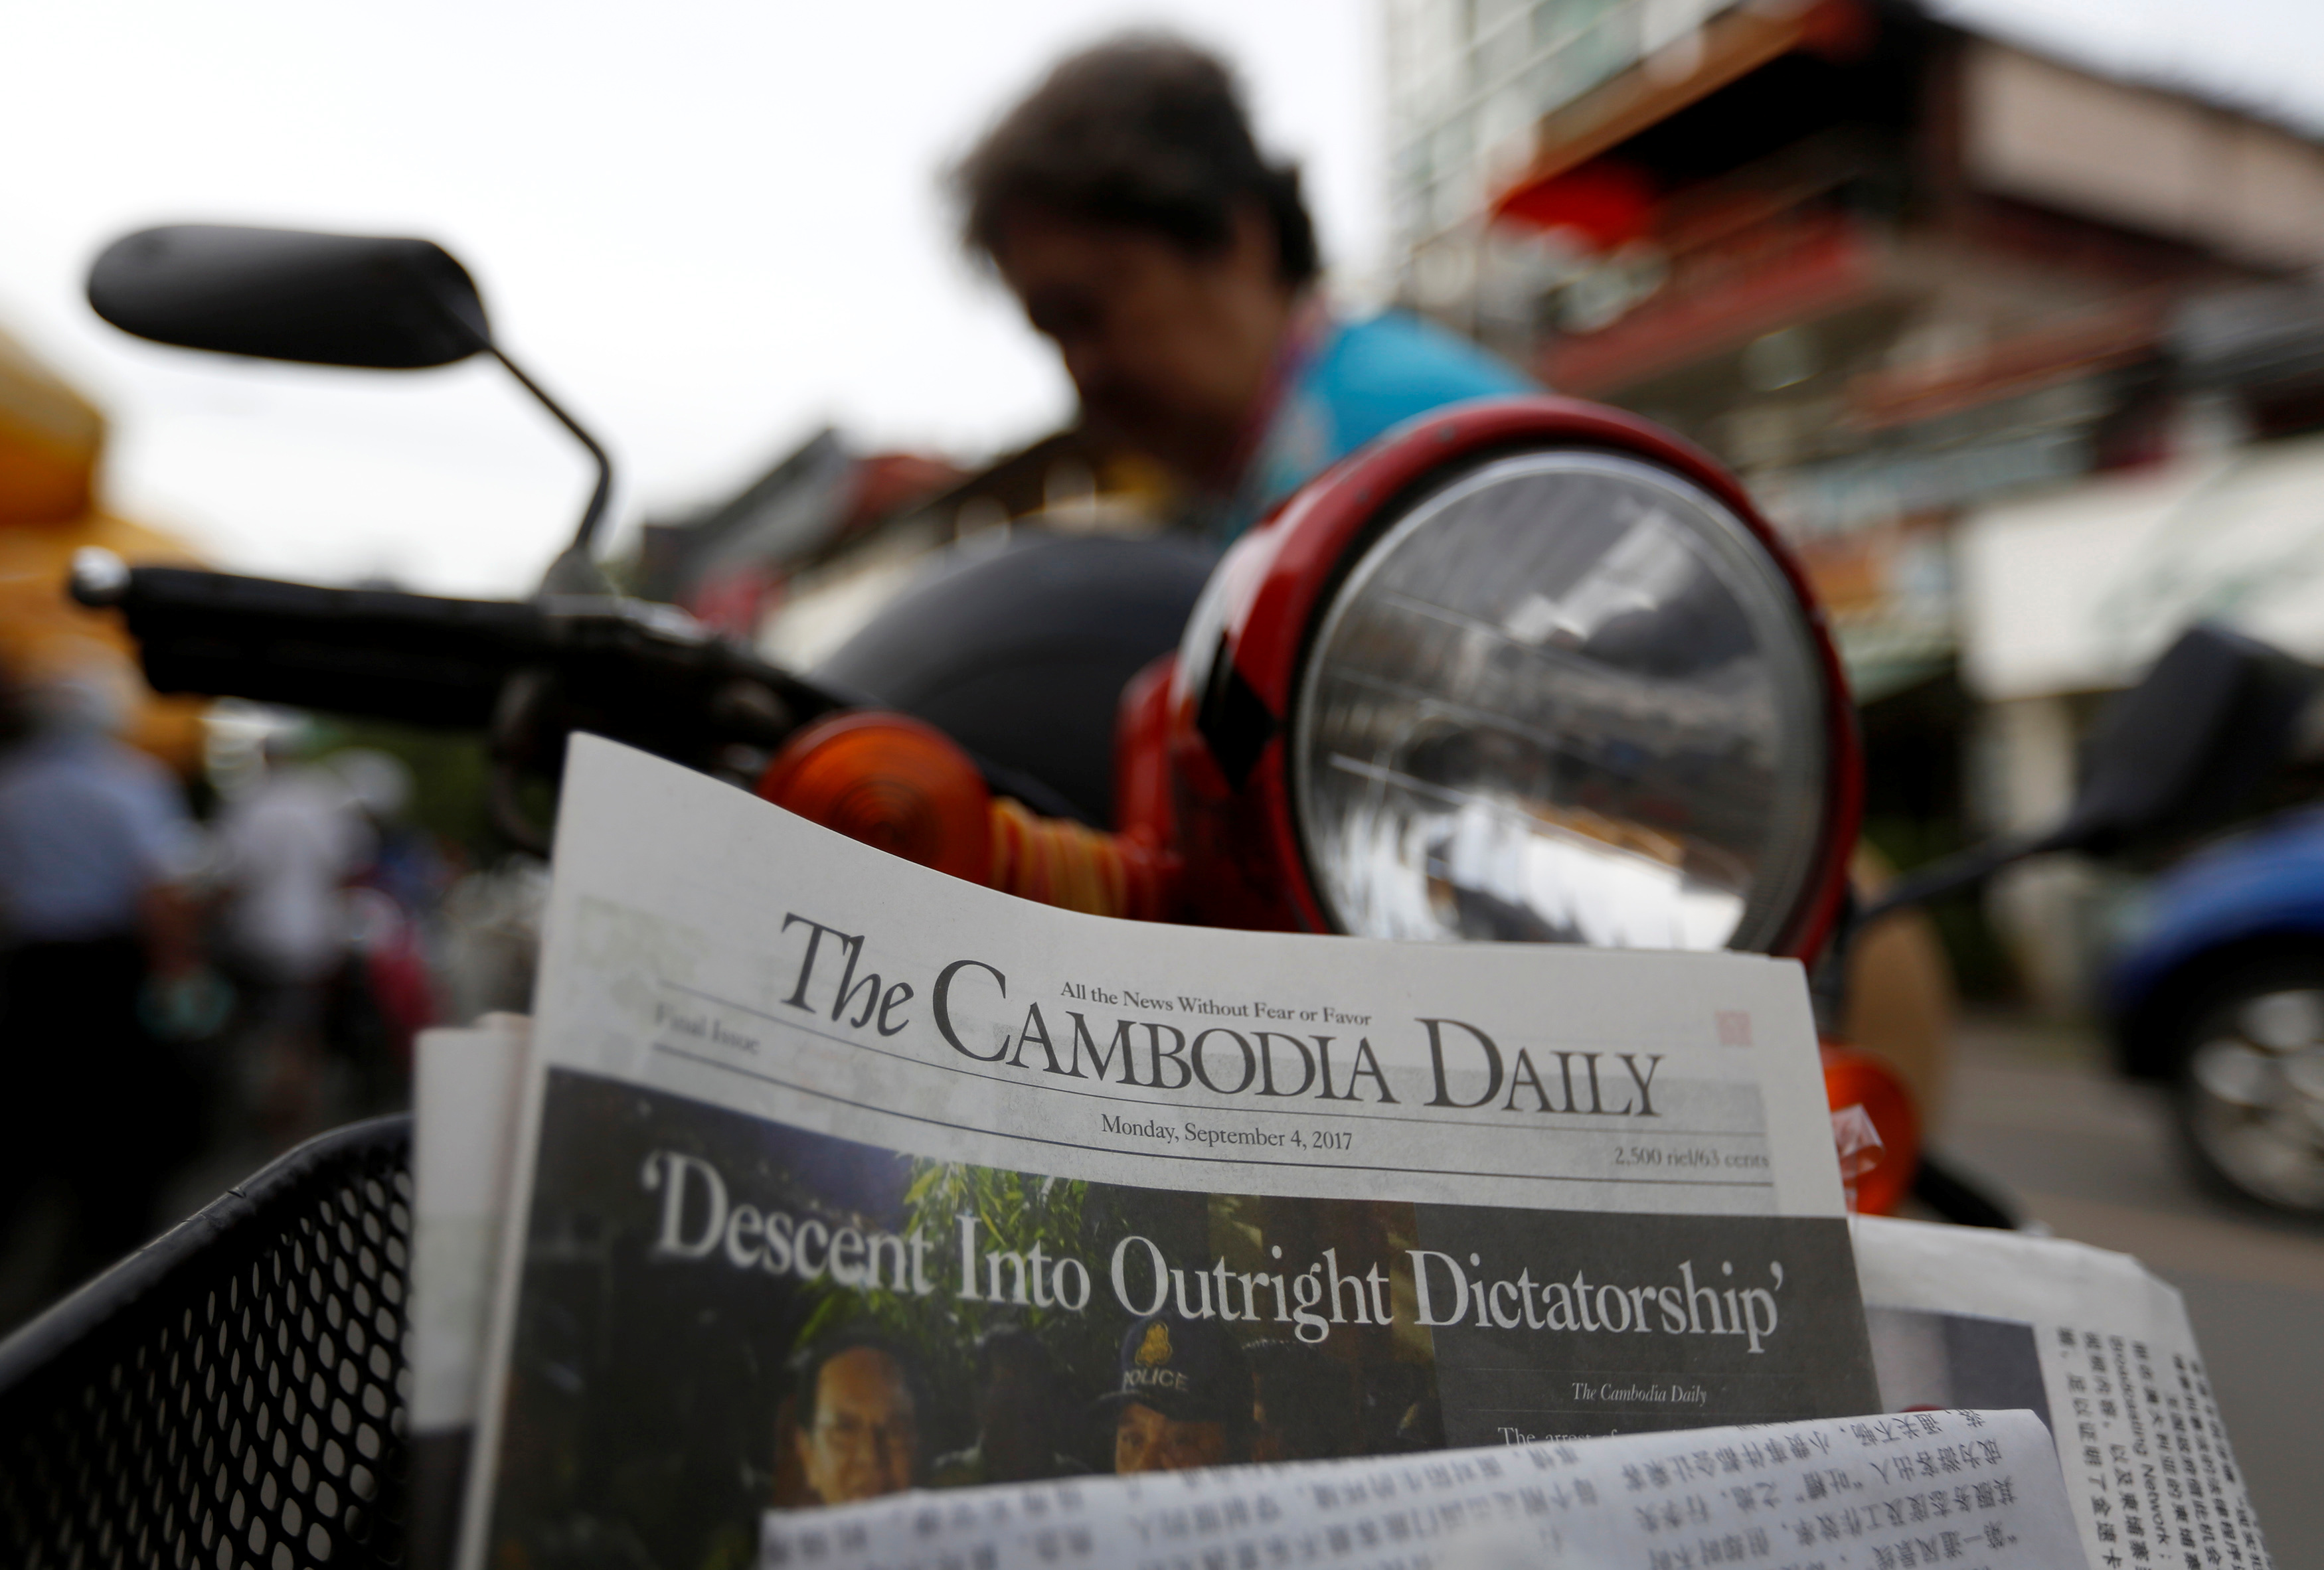 A woman buys the final issue of The Cambodia Daily newspaper at a store along a street in Phnom Penh